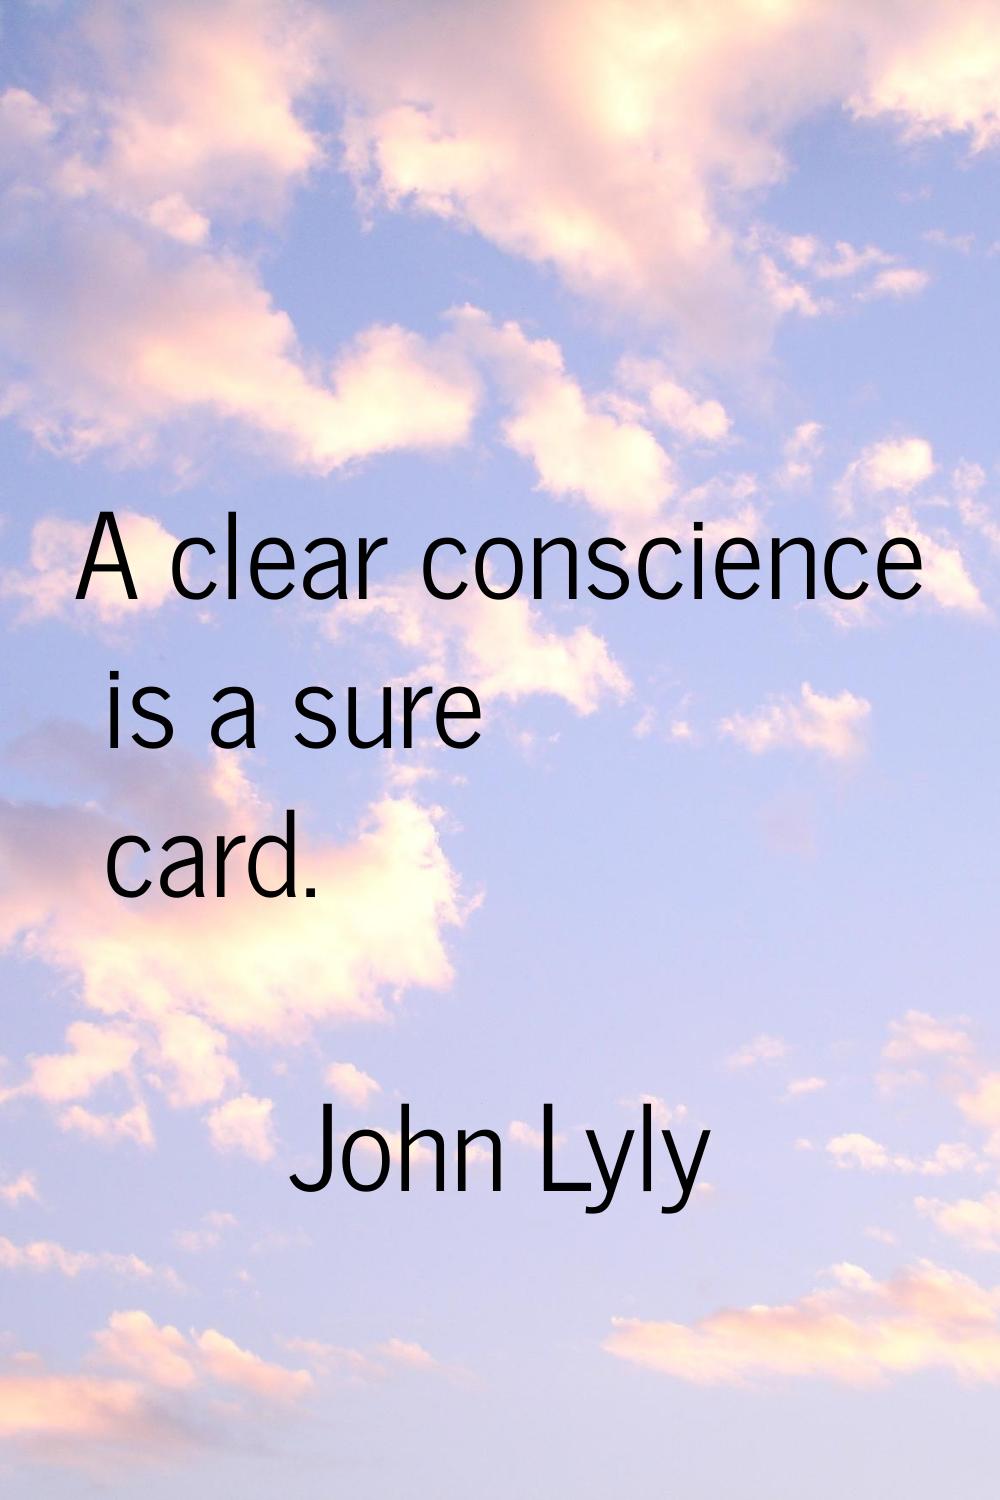 A clear conscience is a sure card.